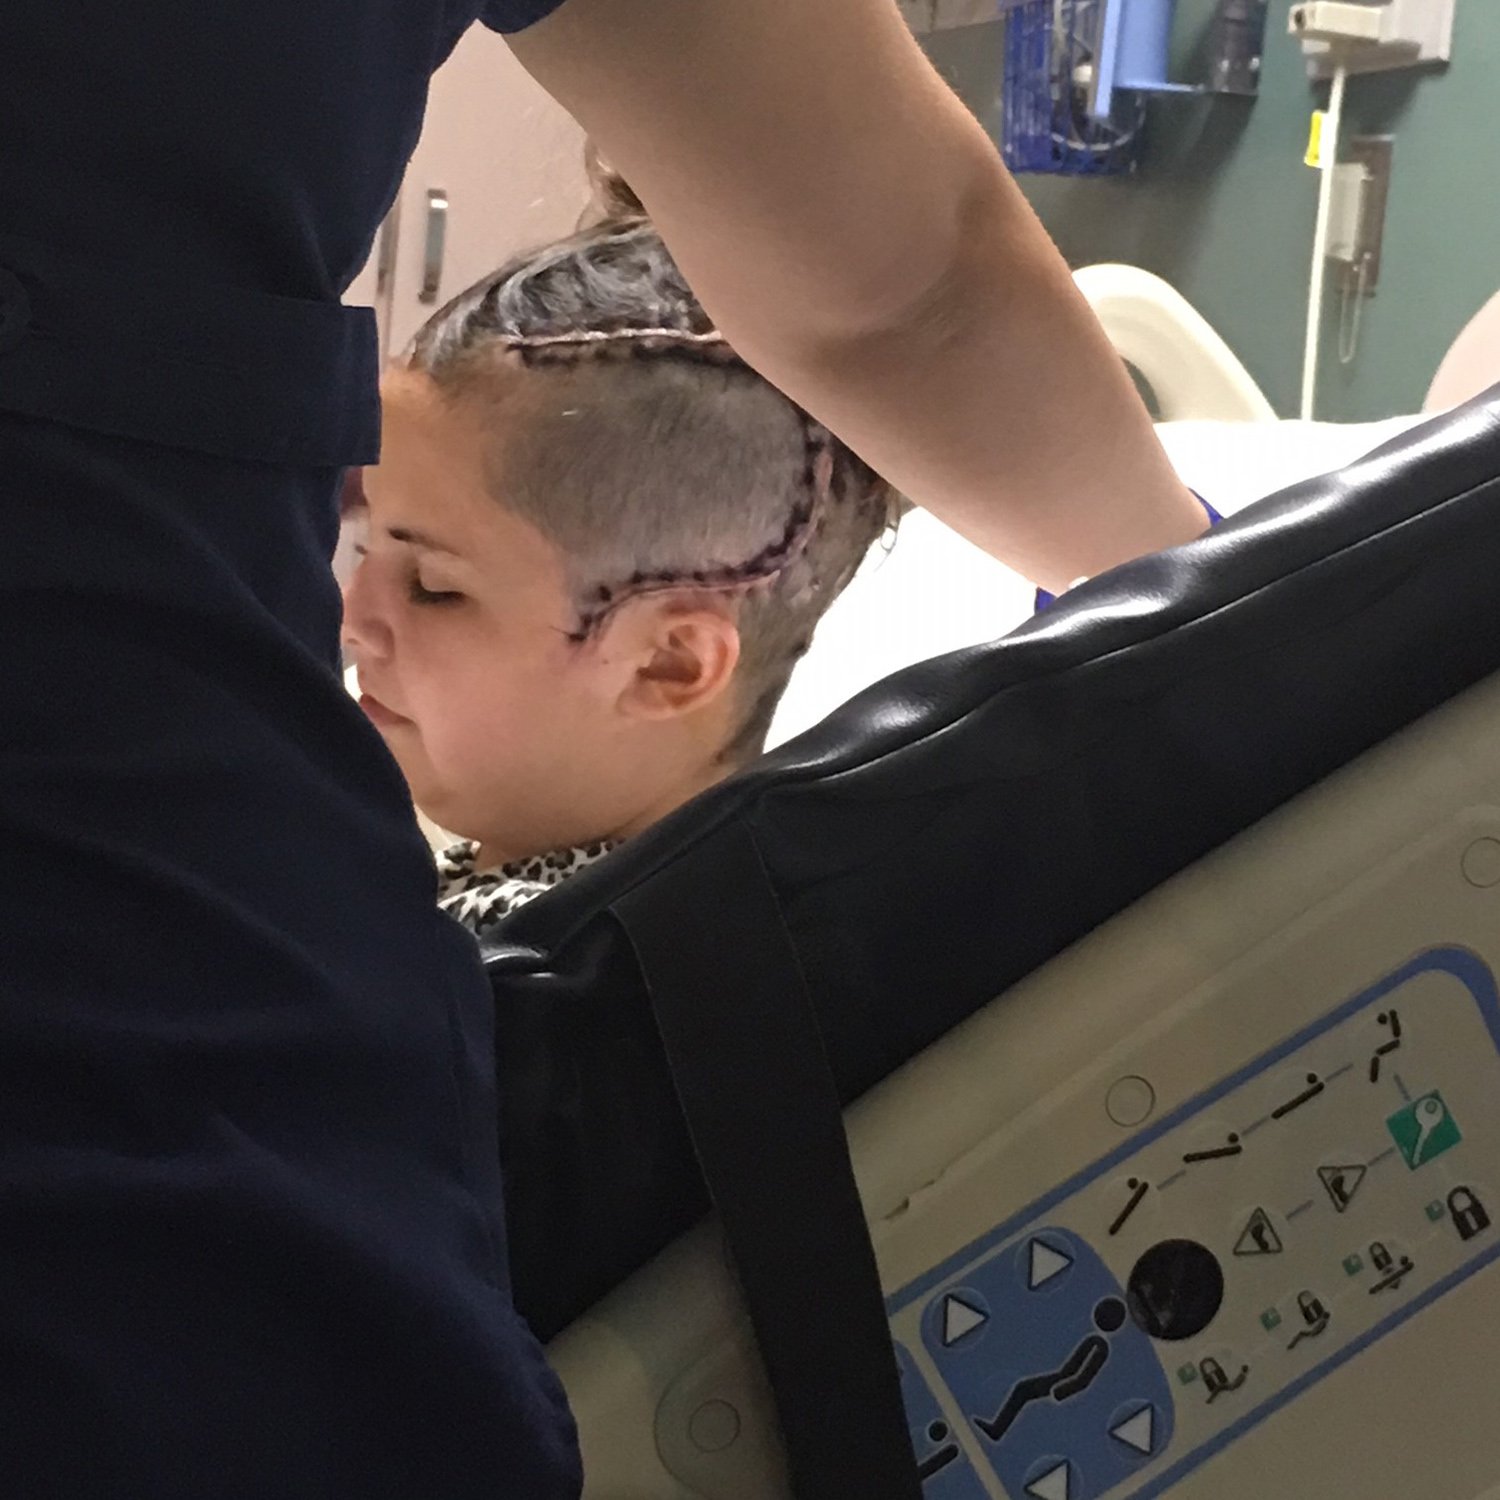 Sierra Cruz, 27, during her last long-term hospital stay. Cruz got intracranial monitoring to see if she was a candidate for brain surgery after prescription medication and a VNS implant failed to control her seizures. 